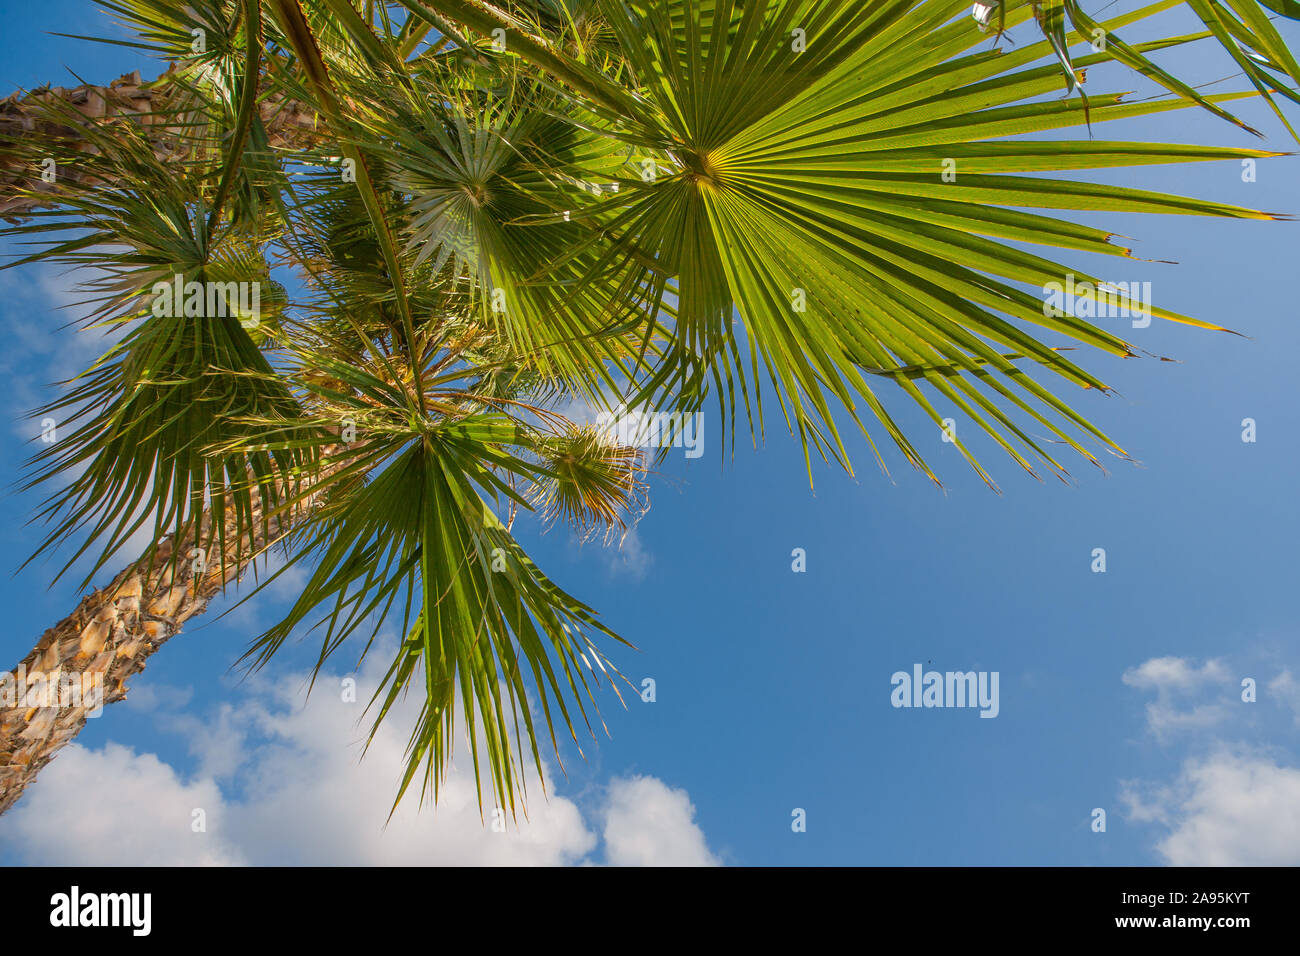 Beach with palm trees leaves and beautiful blue sky Stock Photo